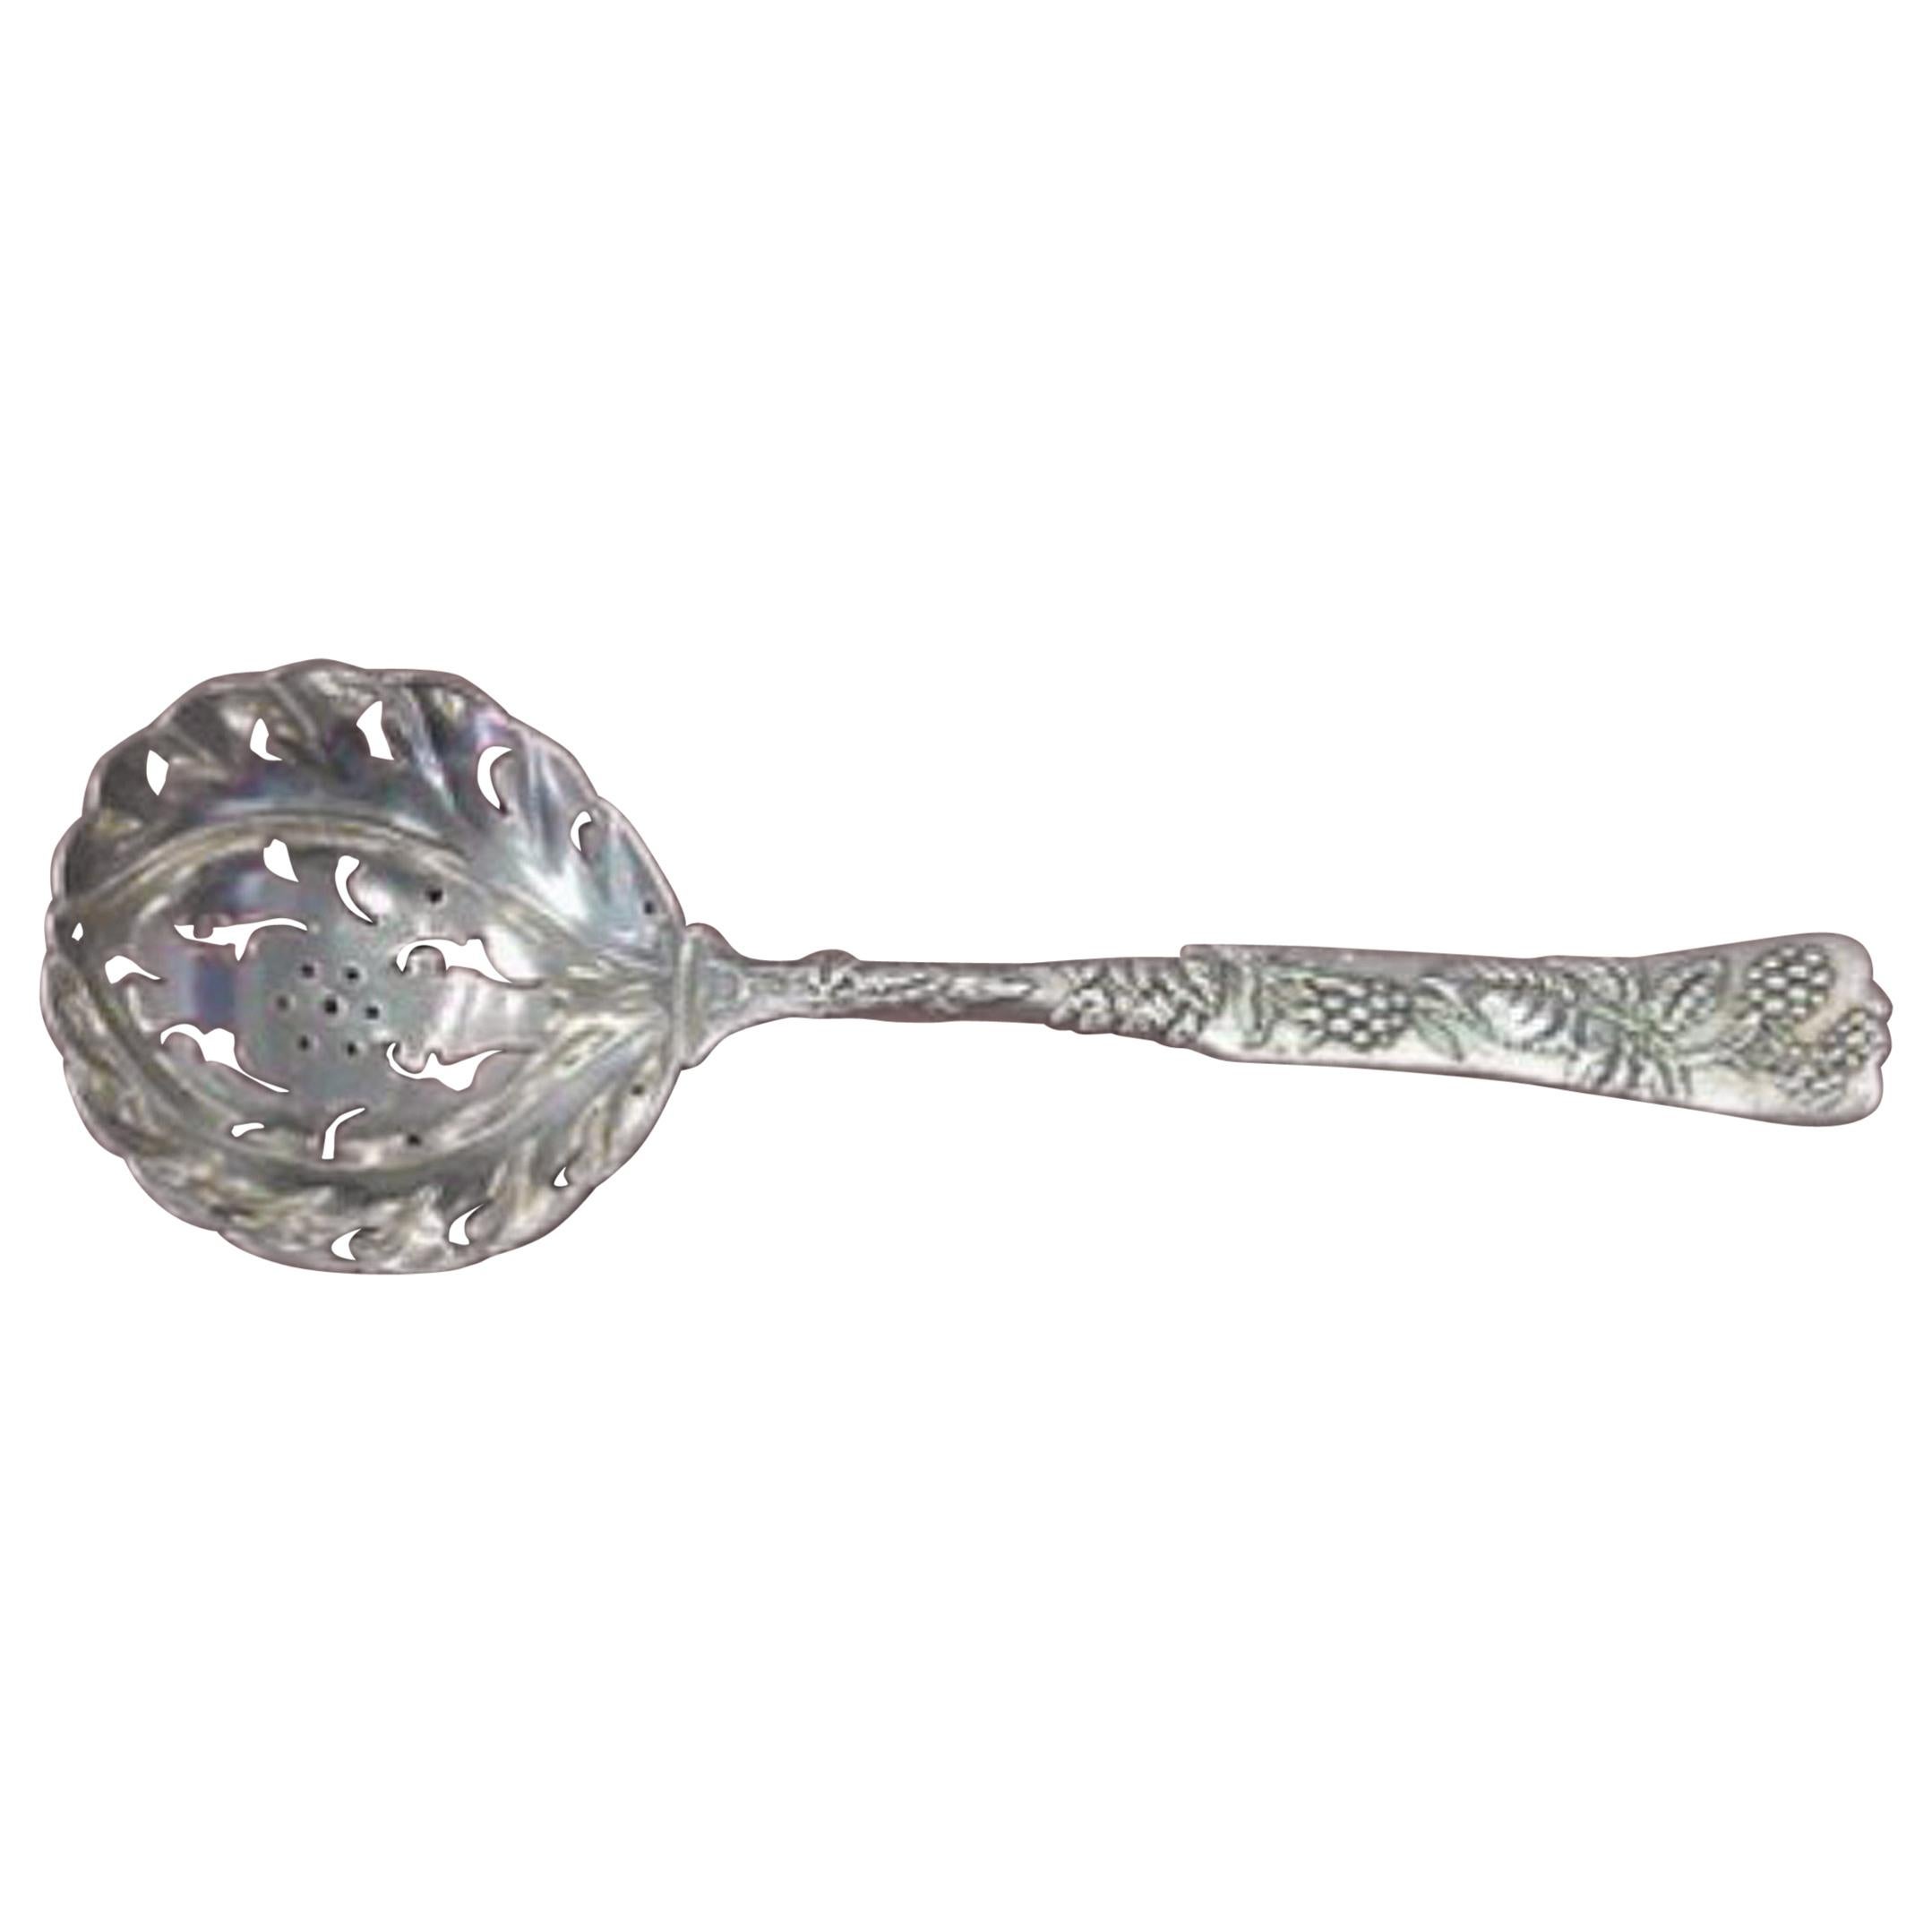 Vine by Tiffany & Co. Sterling Silver Sugar Sifter with Raspberries